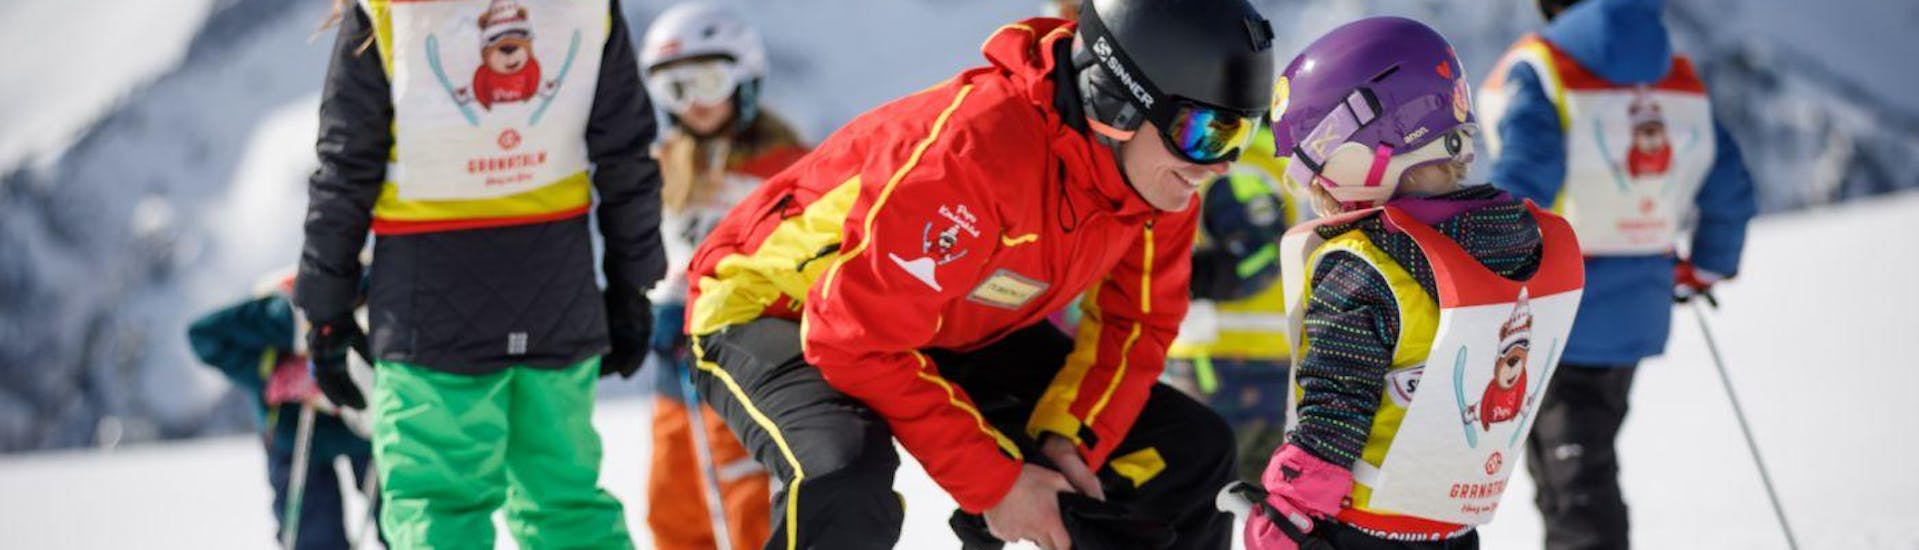 Private Ski Lessons for Kids of All Levels with Skischule Sunny Finkenberg - Hero image